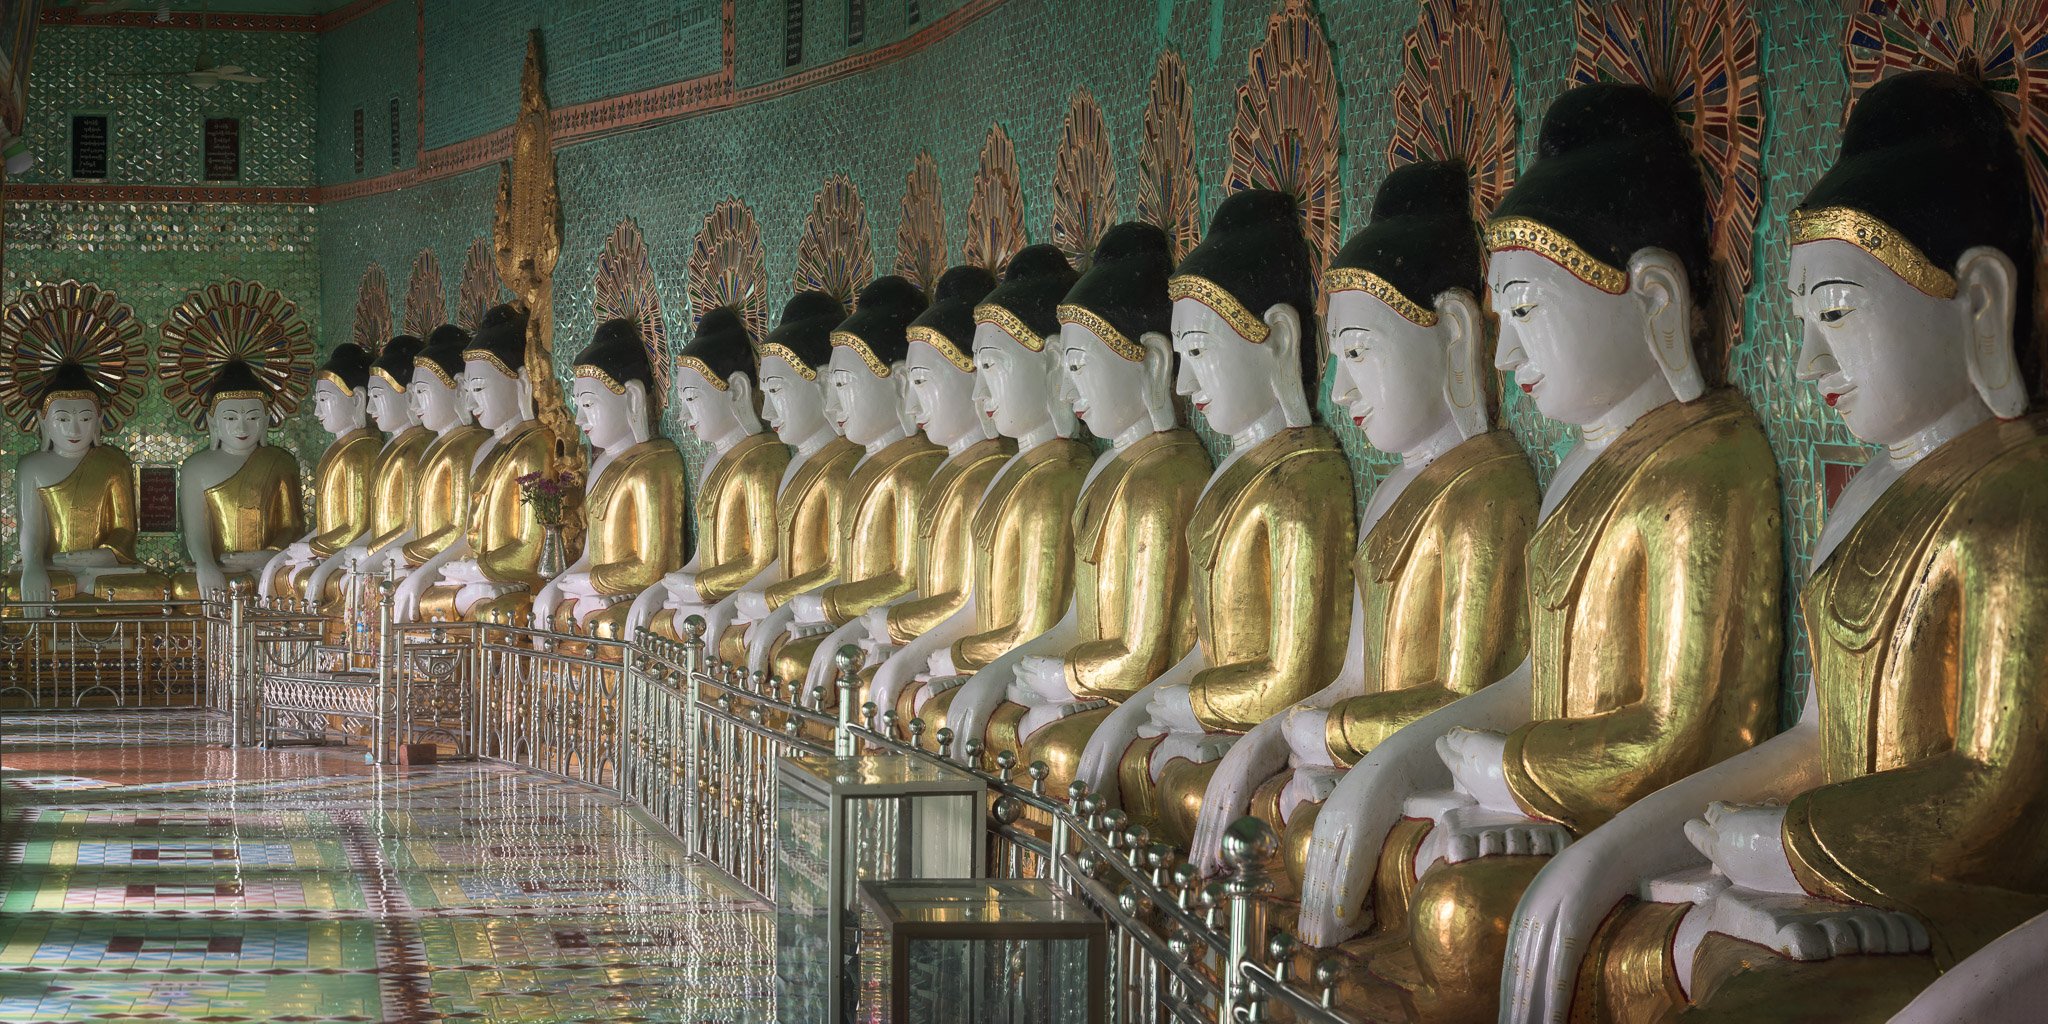 ancient, architecture, art, asia, buddha, buddhism, buddhist, burma, burmese, culture, decoration, destination, face, forty, gilded, gold, golden, green, heritage, hill, historical, indoors, interior, landmark, line, mandalay, min, monastery, monument, my, Andrey Omelyanchuk